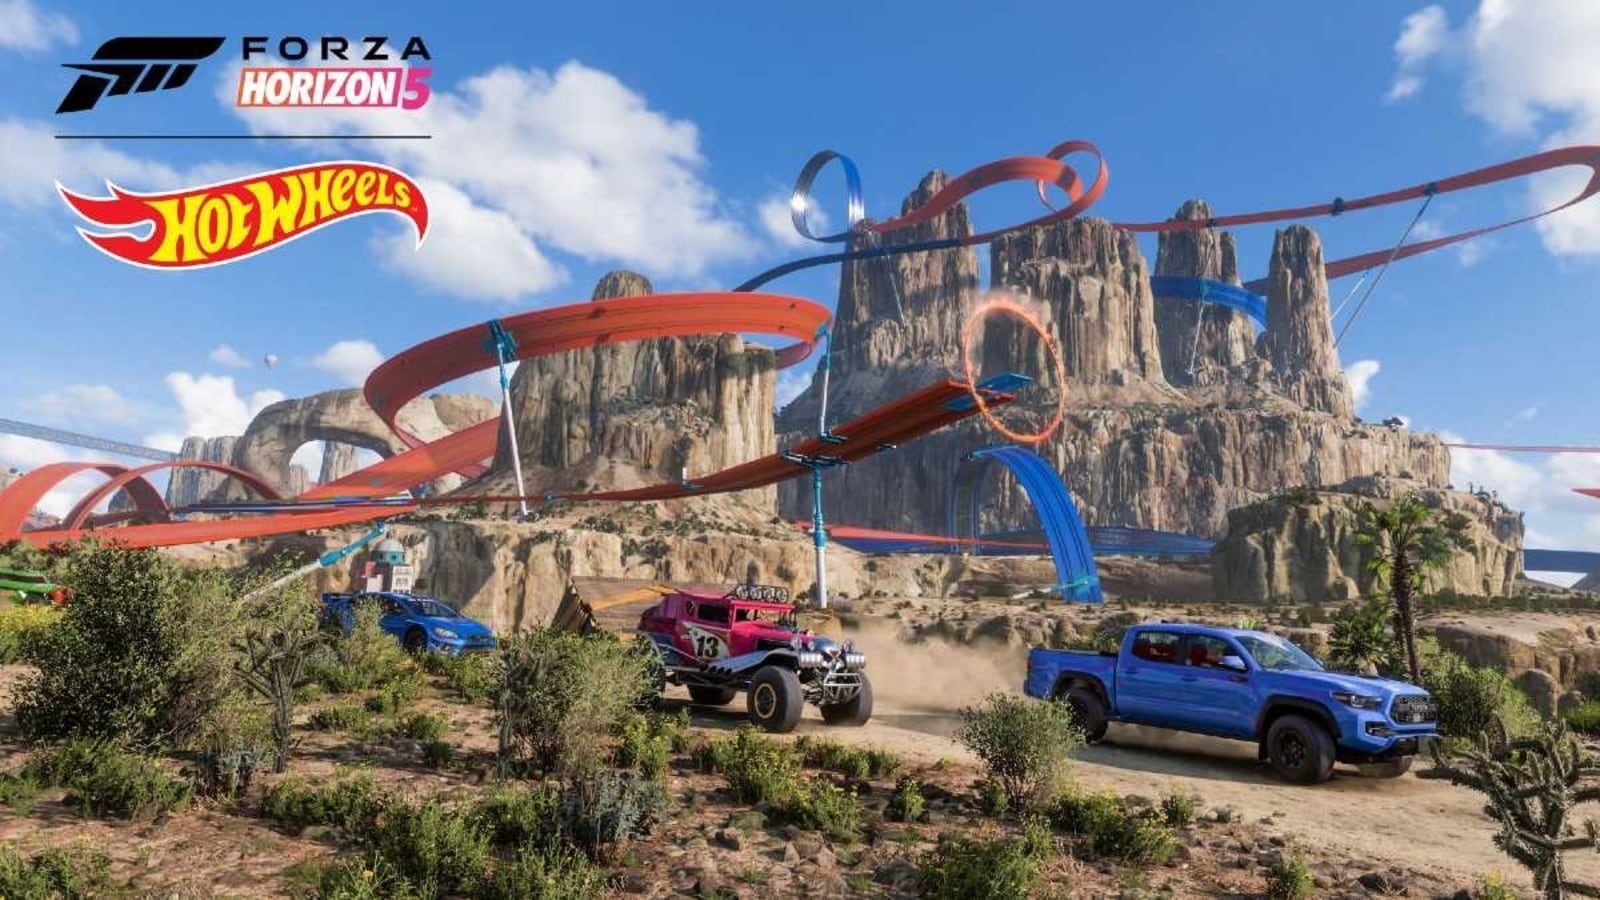 Forza Horizon 5 lets you play on Hot Wheels tracks! And some